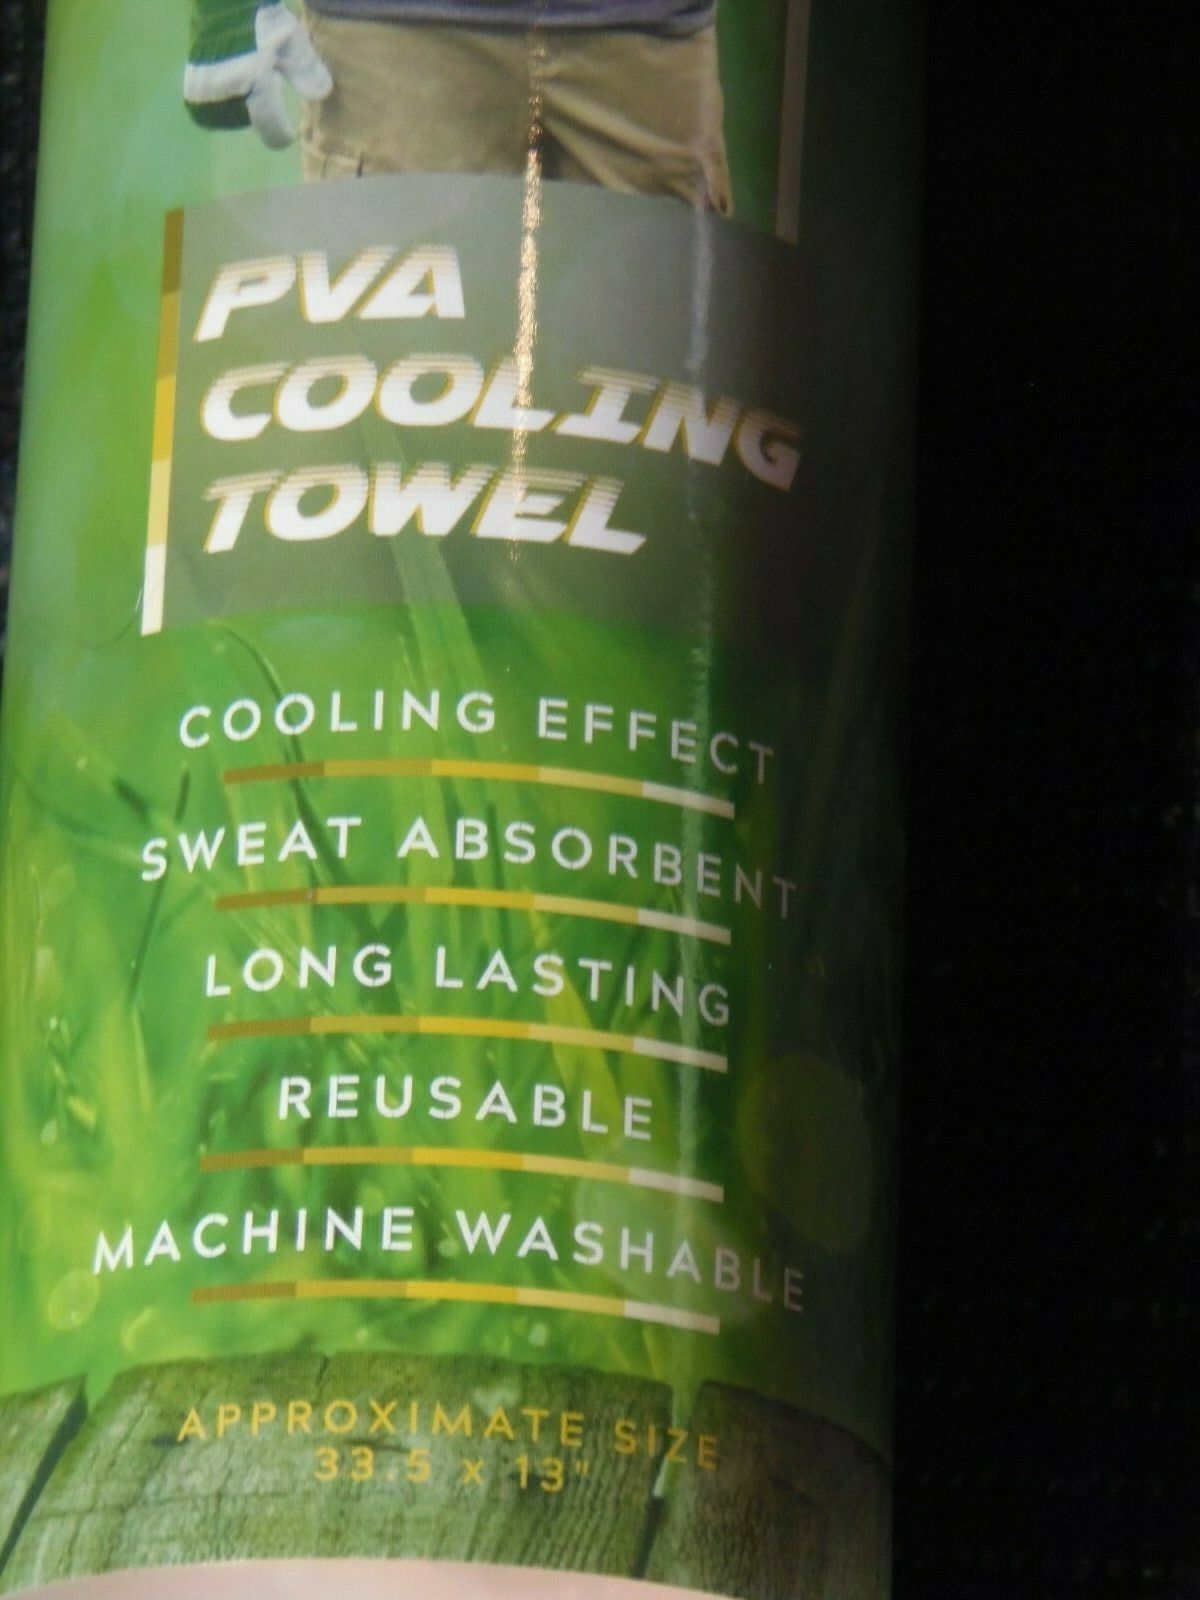 Cooling Towel 33.5 X 13" Pva Absorbent Cloth Color,yellow, Have Other Colors(po2